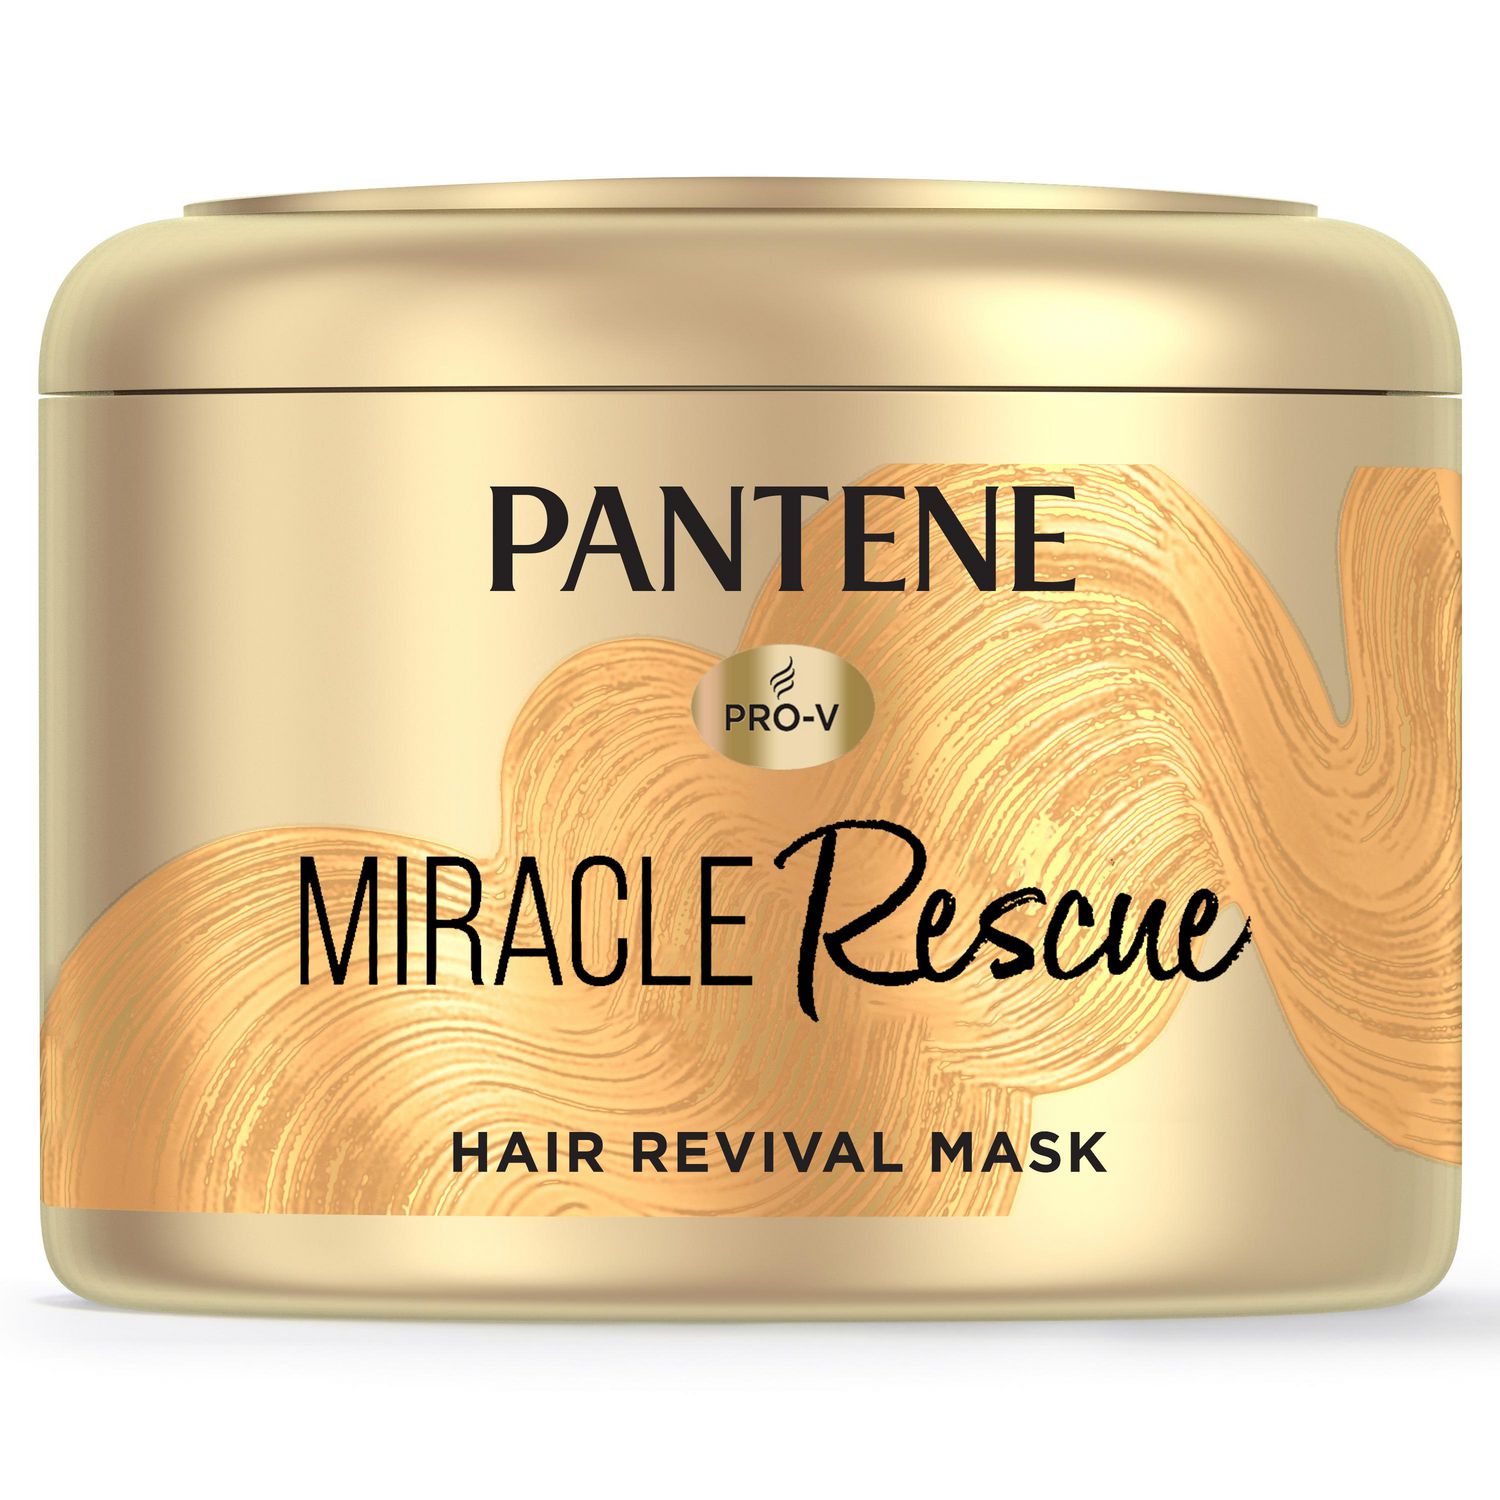 Pantene Hair Mask, Deep Conditioning Hair Mask for Dry Damaged Hair,  Miracle Rescue | Walmart Canada